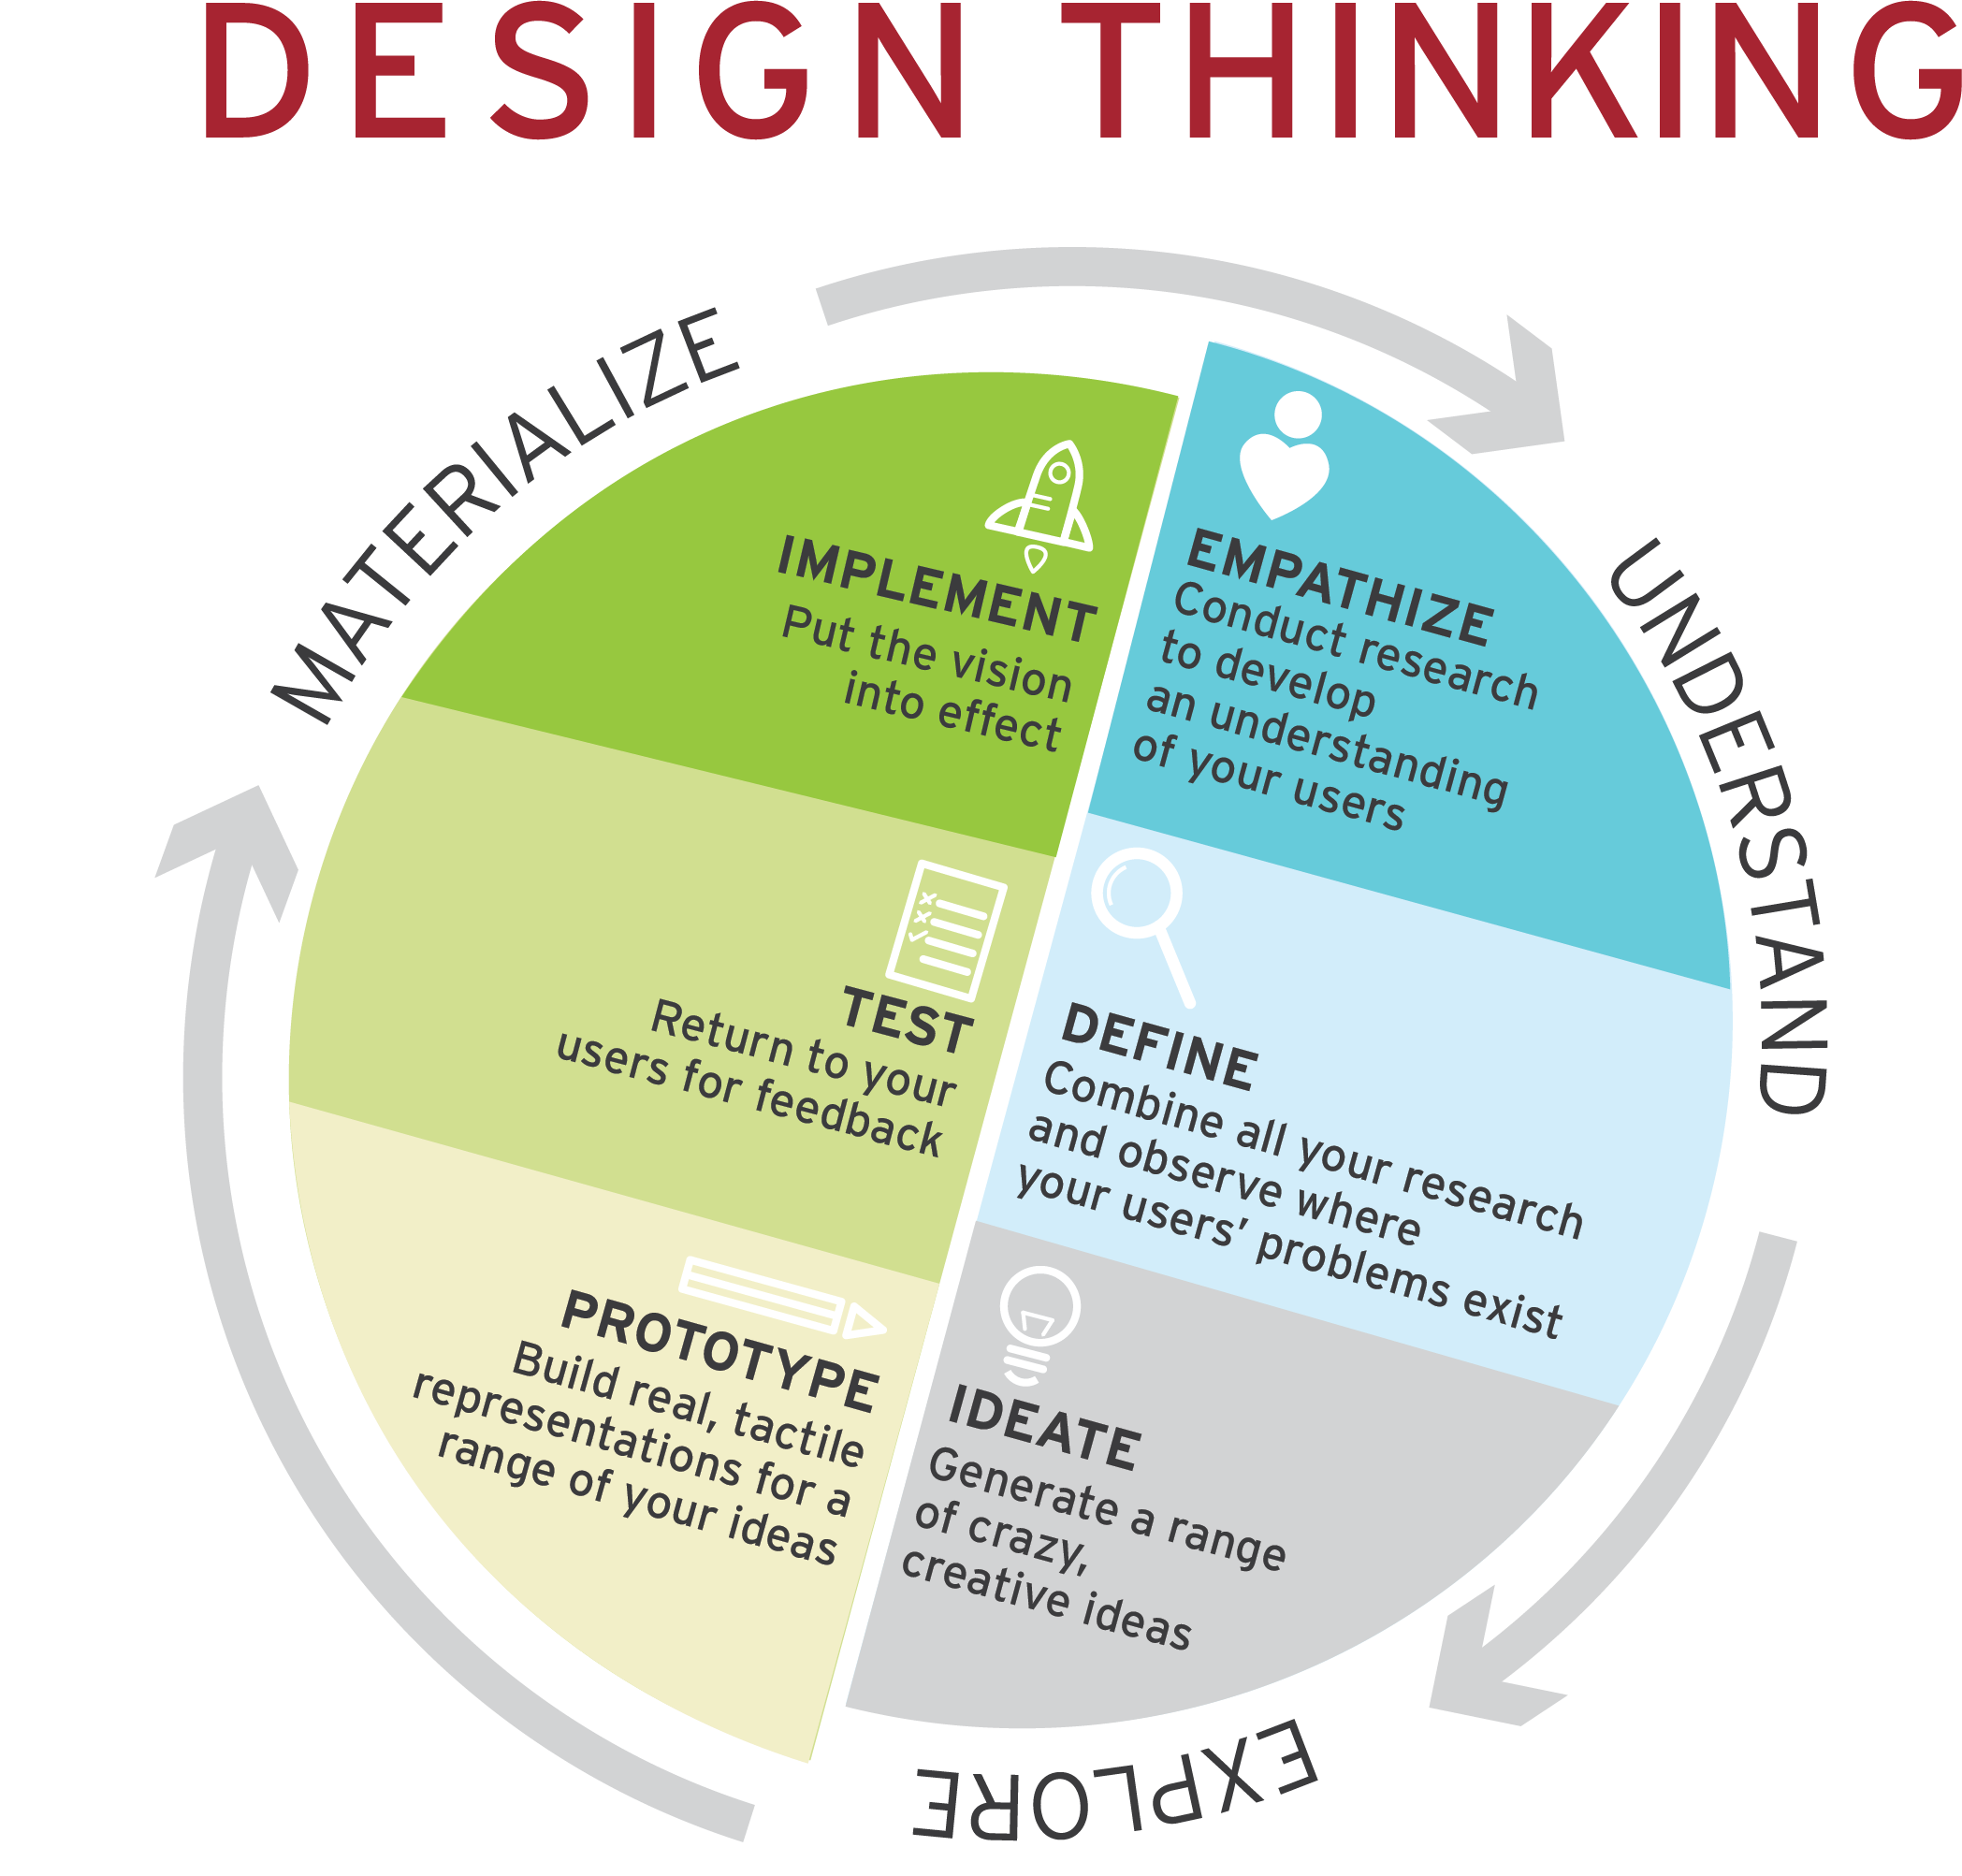 design thinking definition in education